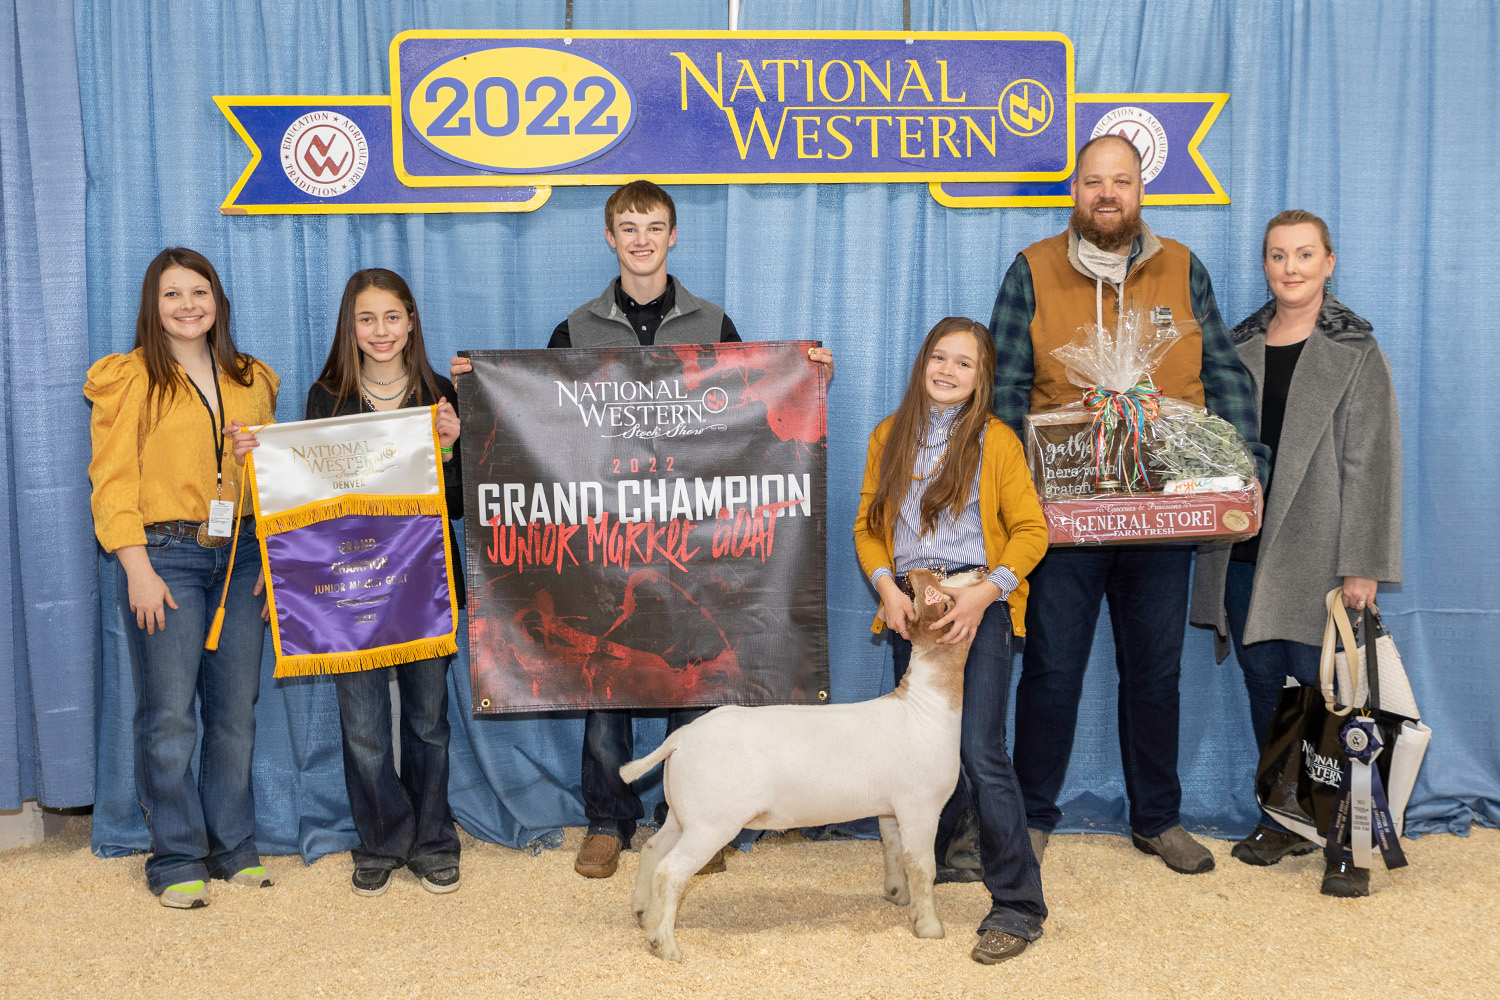 2022 Grand Champion Goat winner: Cody Sells, and Buyer: Babson Farms